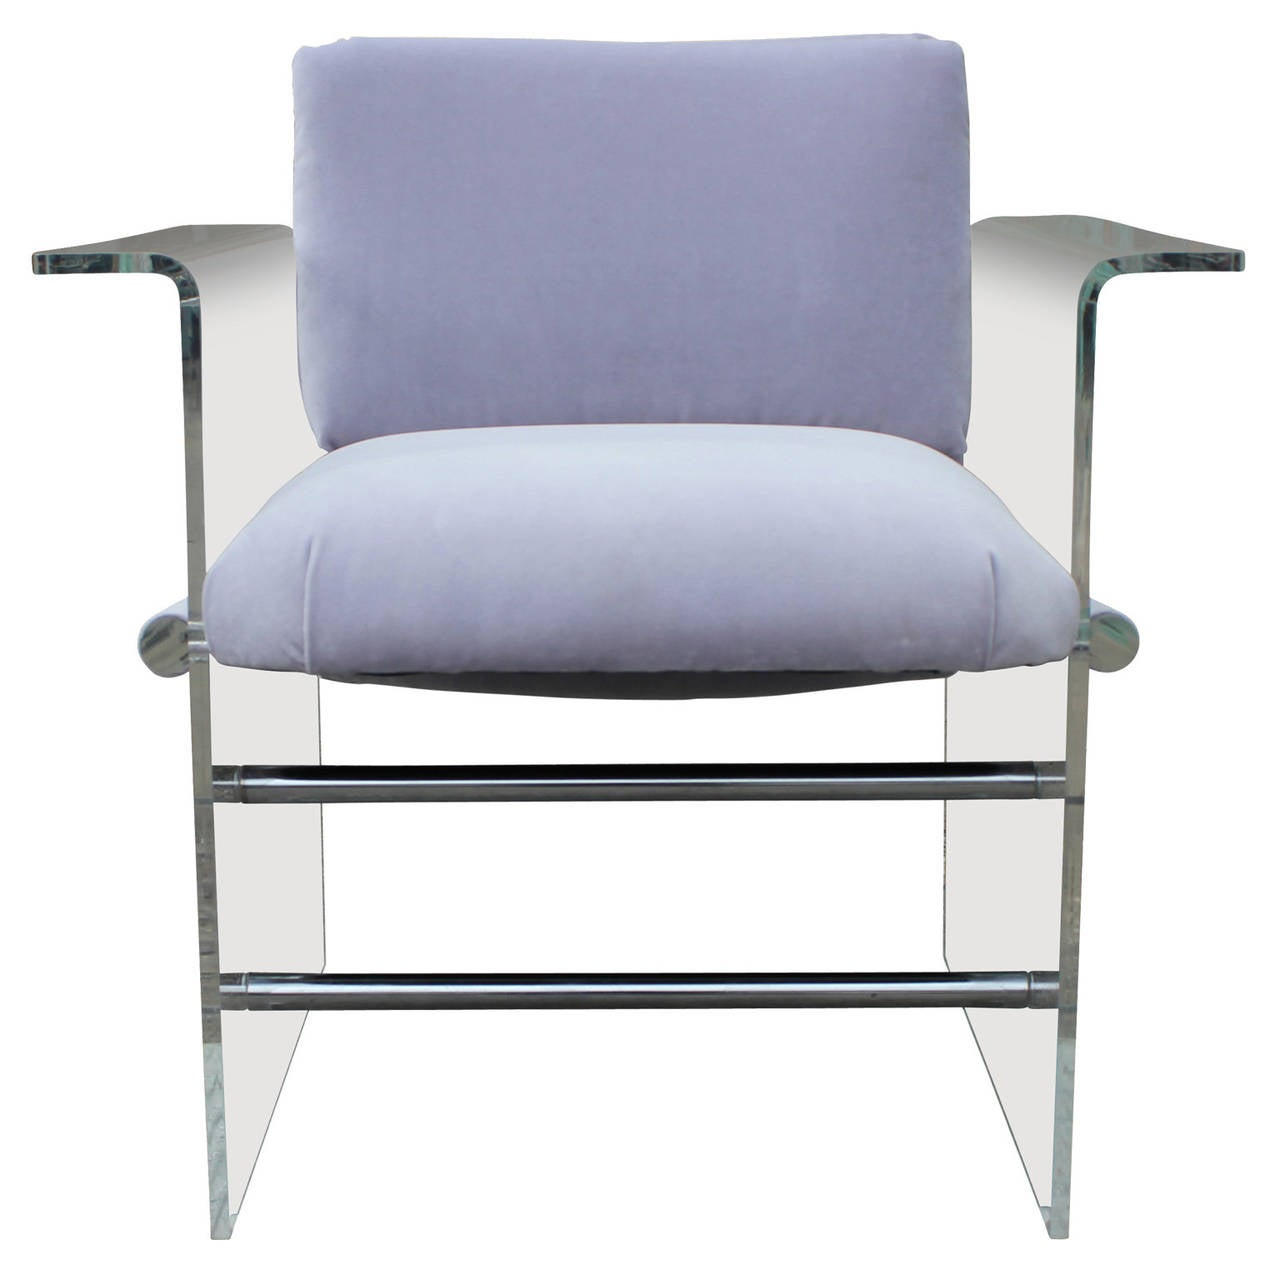 Wonderful pair of chairs with 1/2” thick Lucite shells with splayed arms. Chairs are freshly upholstered in a pale lavender velvet. Seats are detailed with Lucite rods. Chrome rods provide structural support. Lucite is in excellent vintage